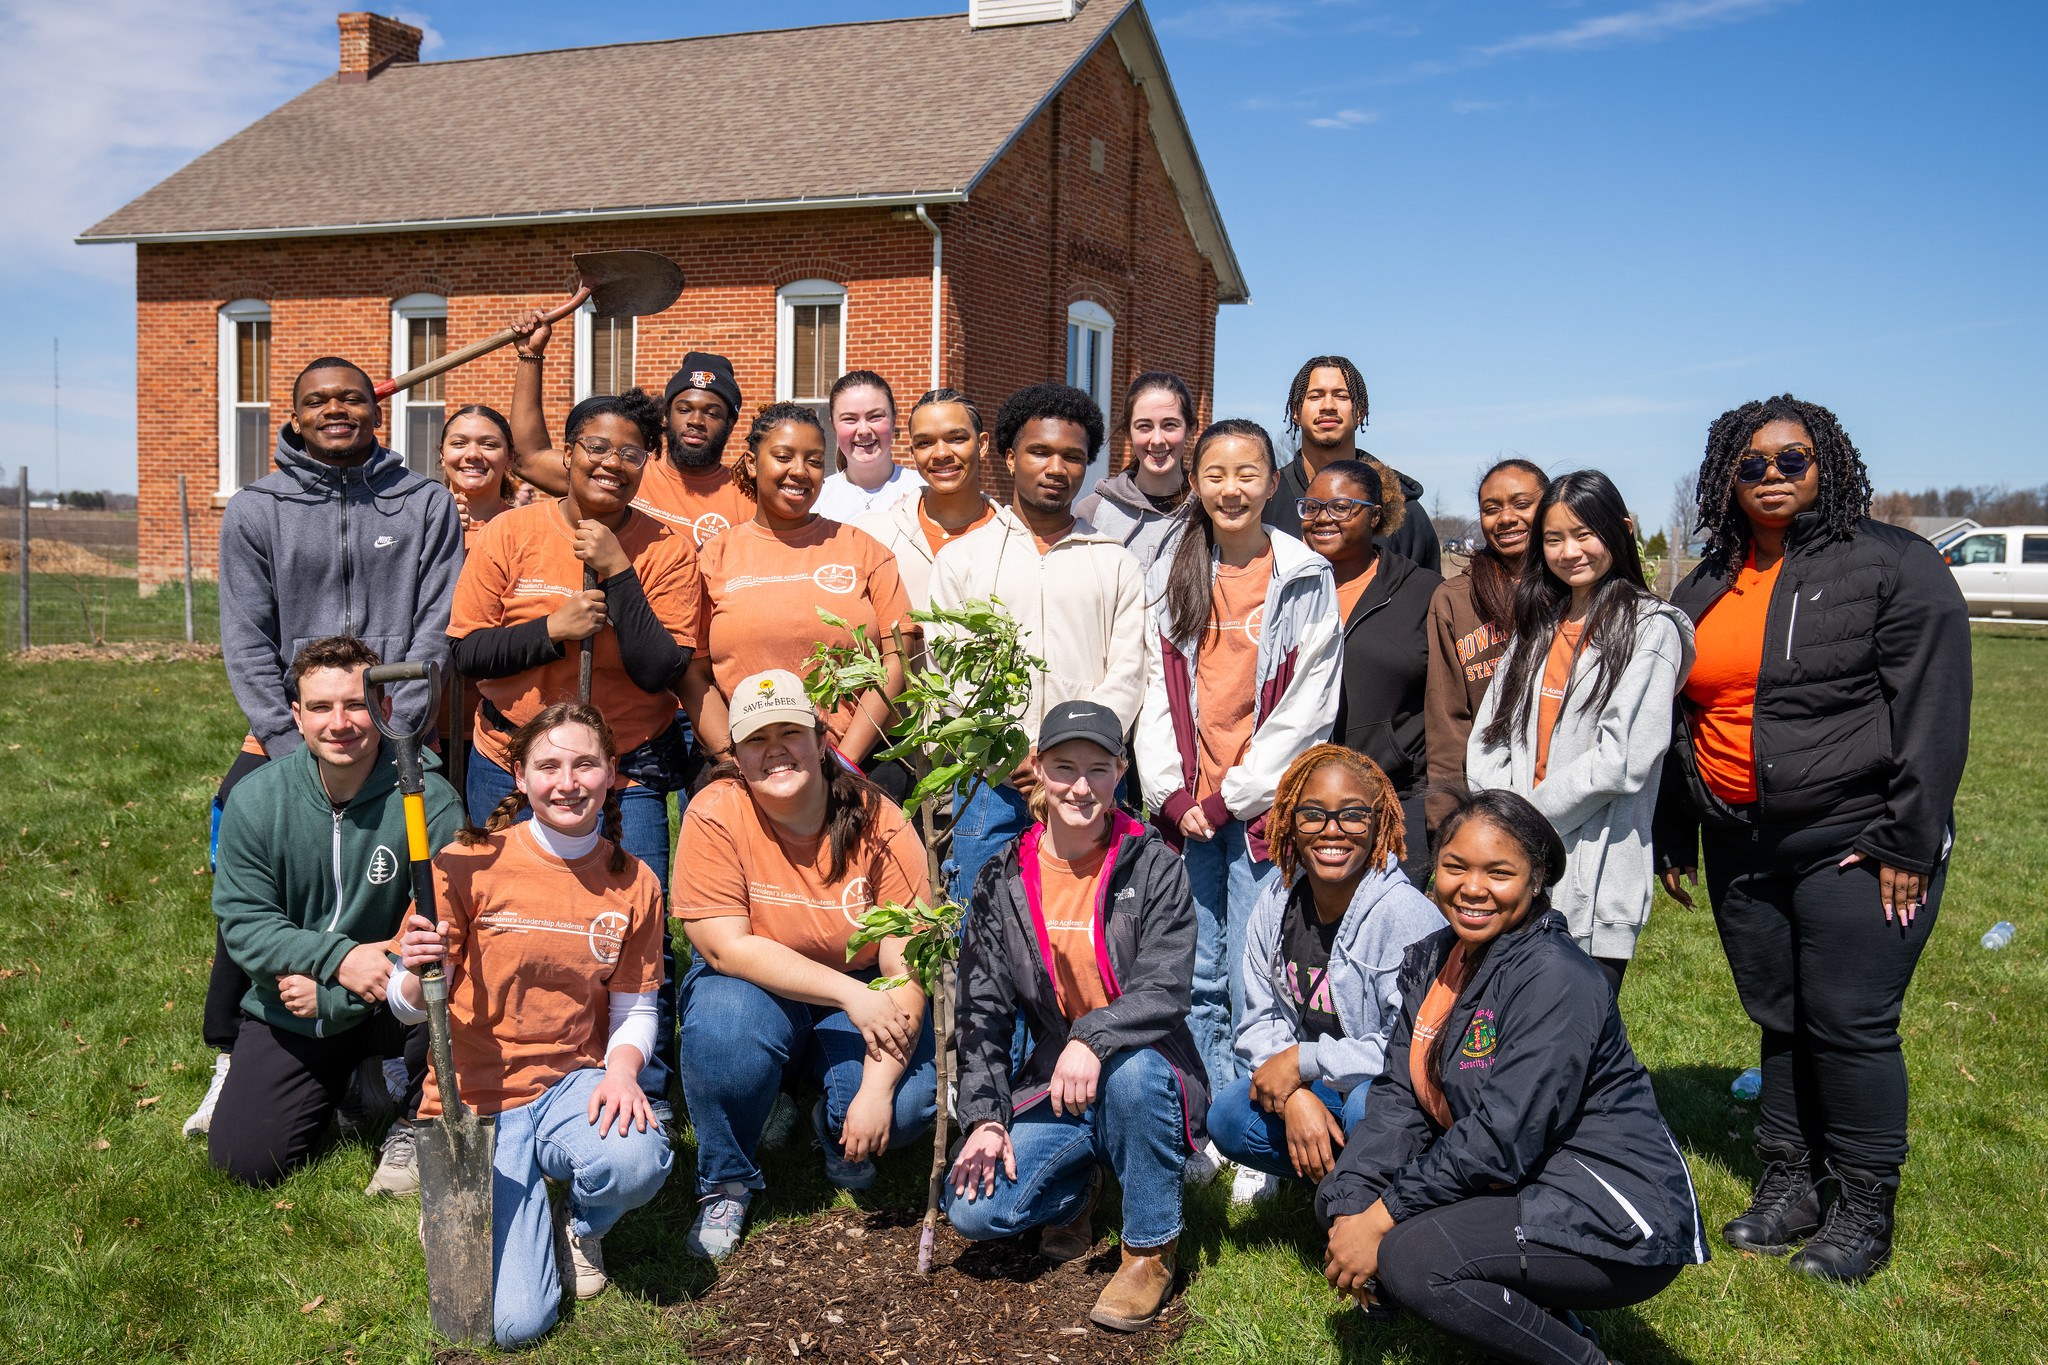 A group of smiling people gathered around a newly planted tree.